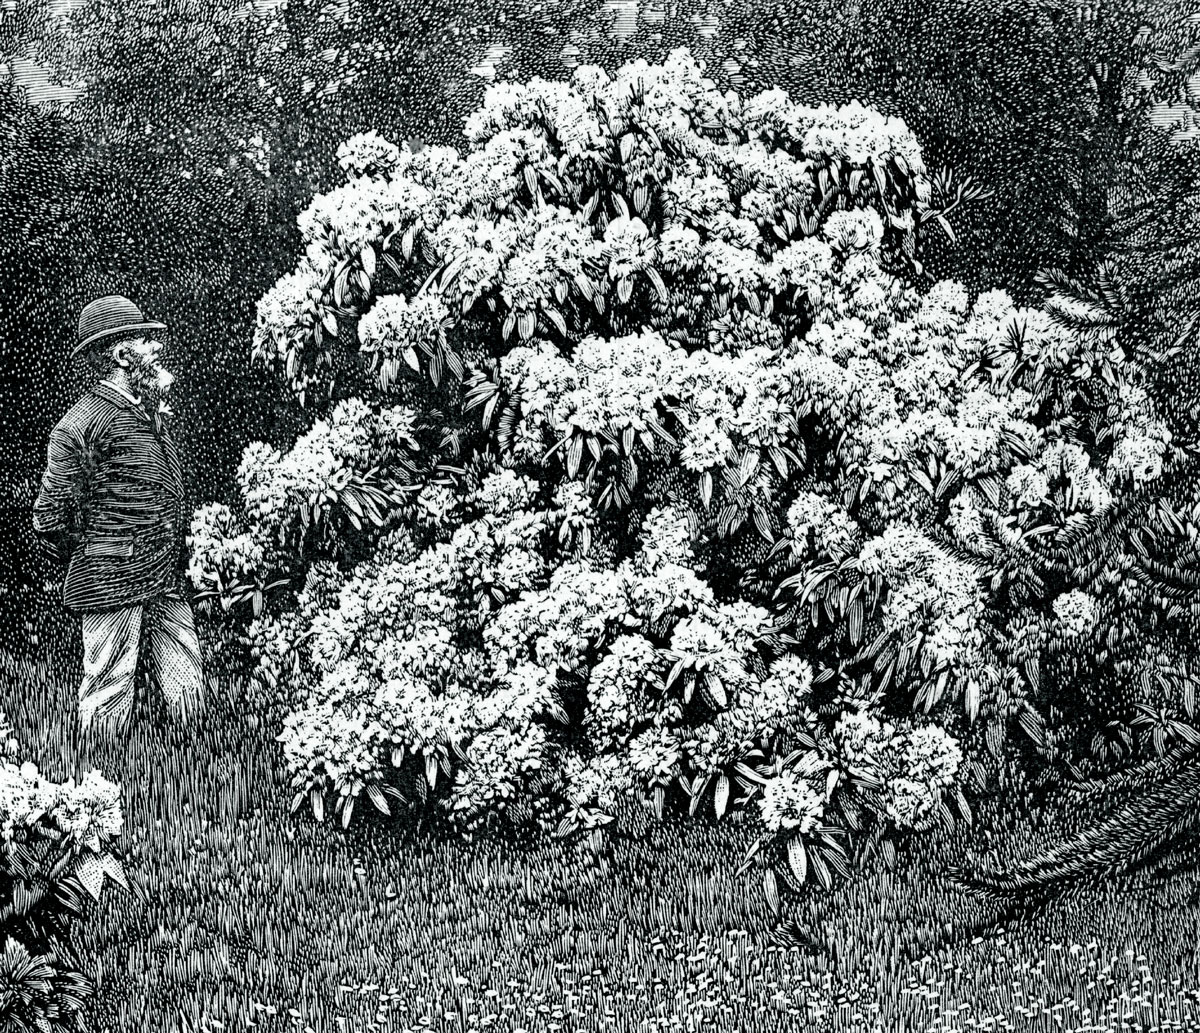 Rhododendrons in an English garden. From William Robinson, The English Flower Garden (7th edition, London, 1899).